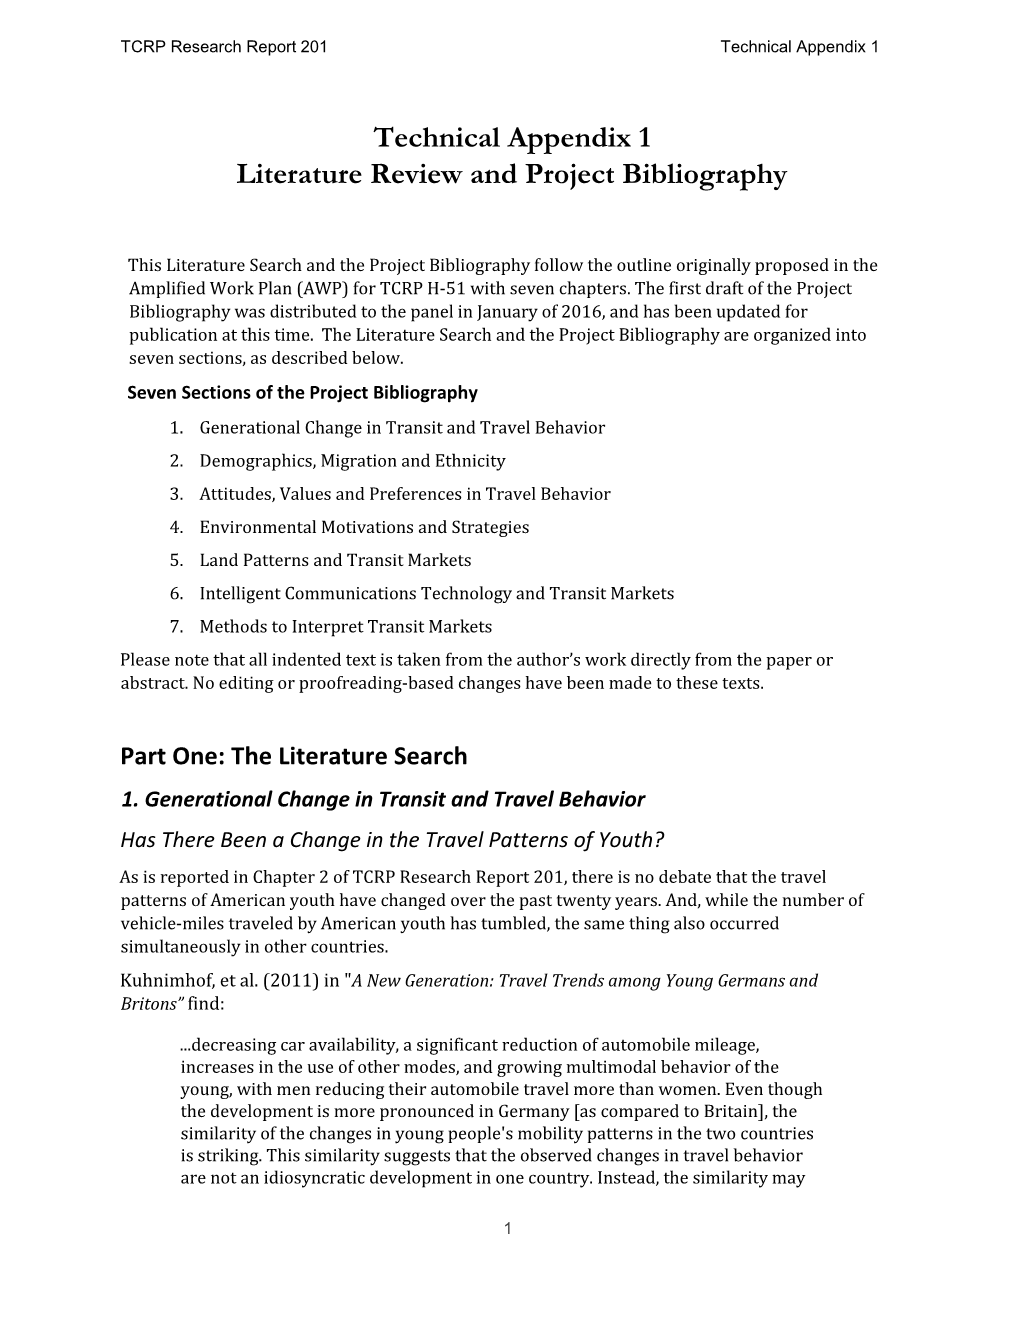 Technical Appendix 1 Literature Review and Project Bibliography